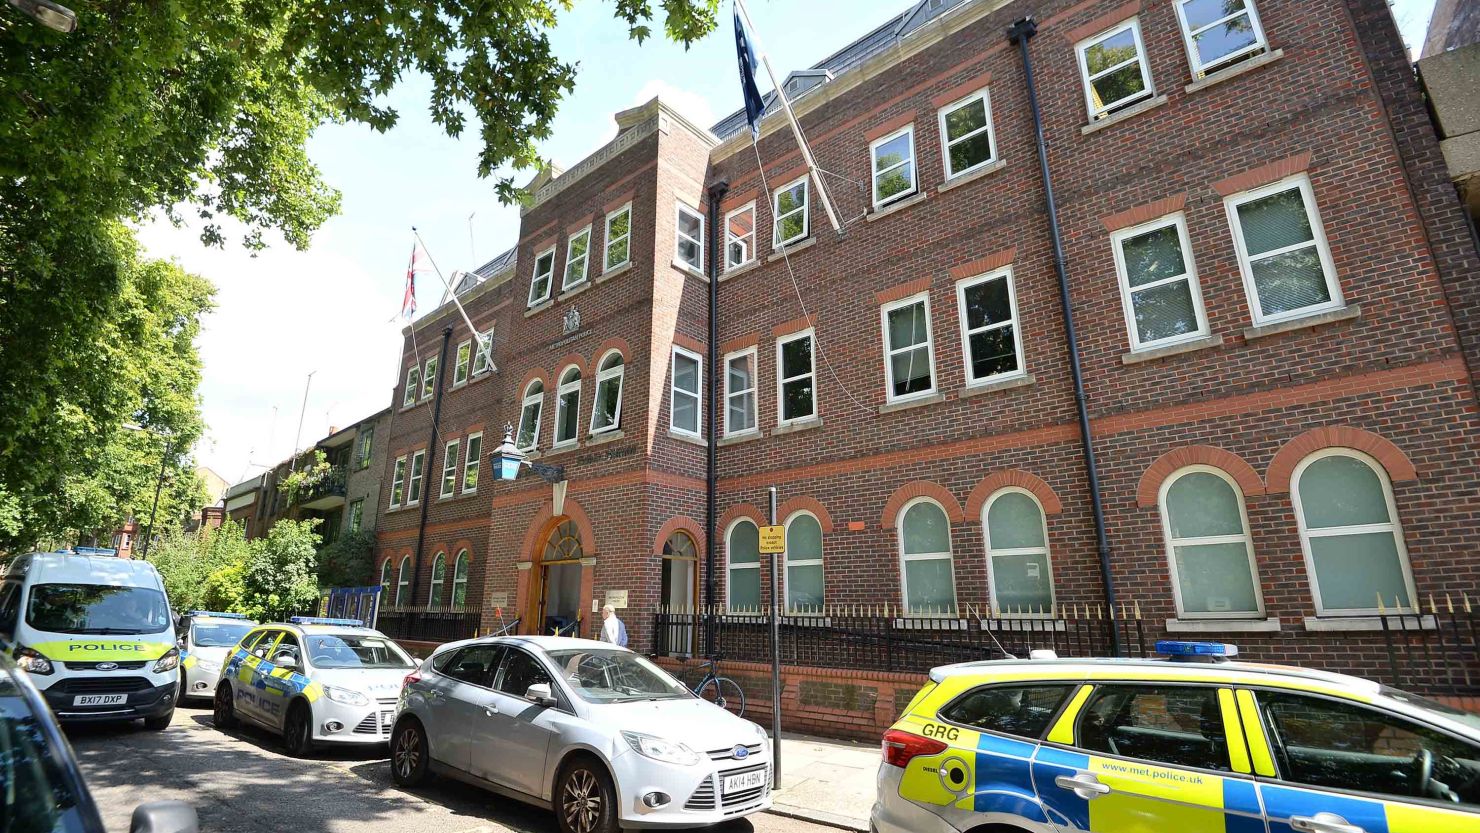 31 officers had their hair cut at Bethnal Green police station, in east London.